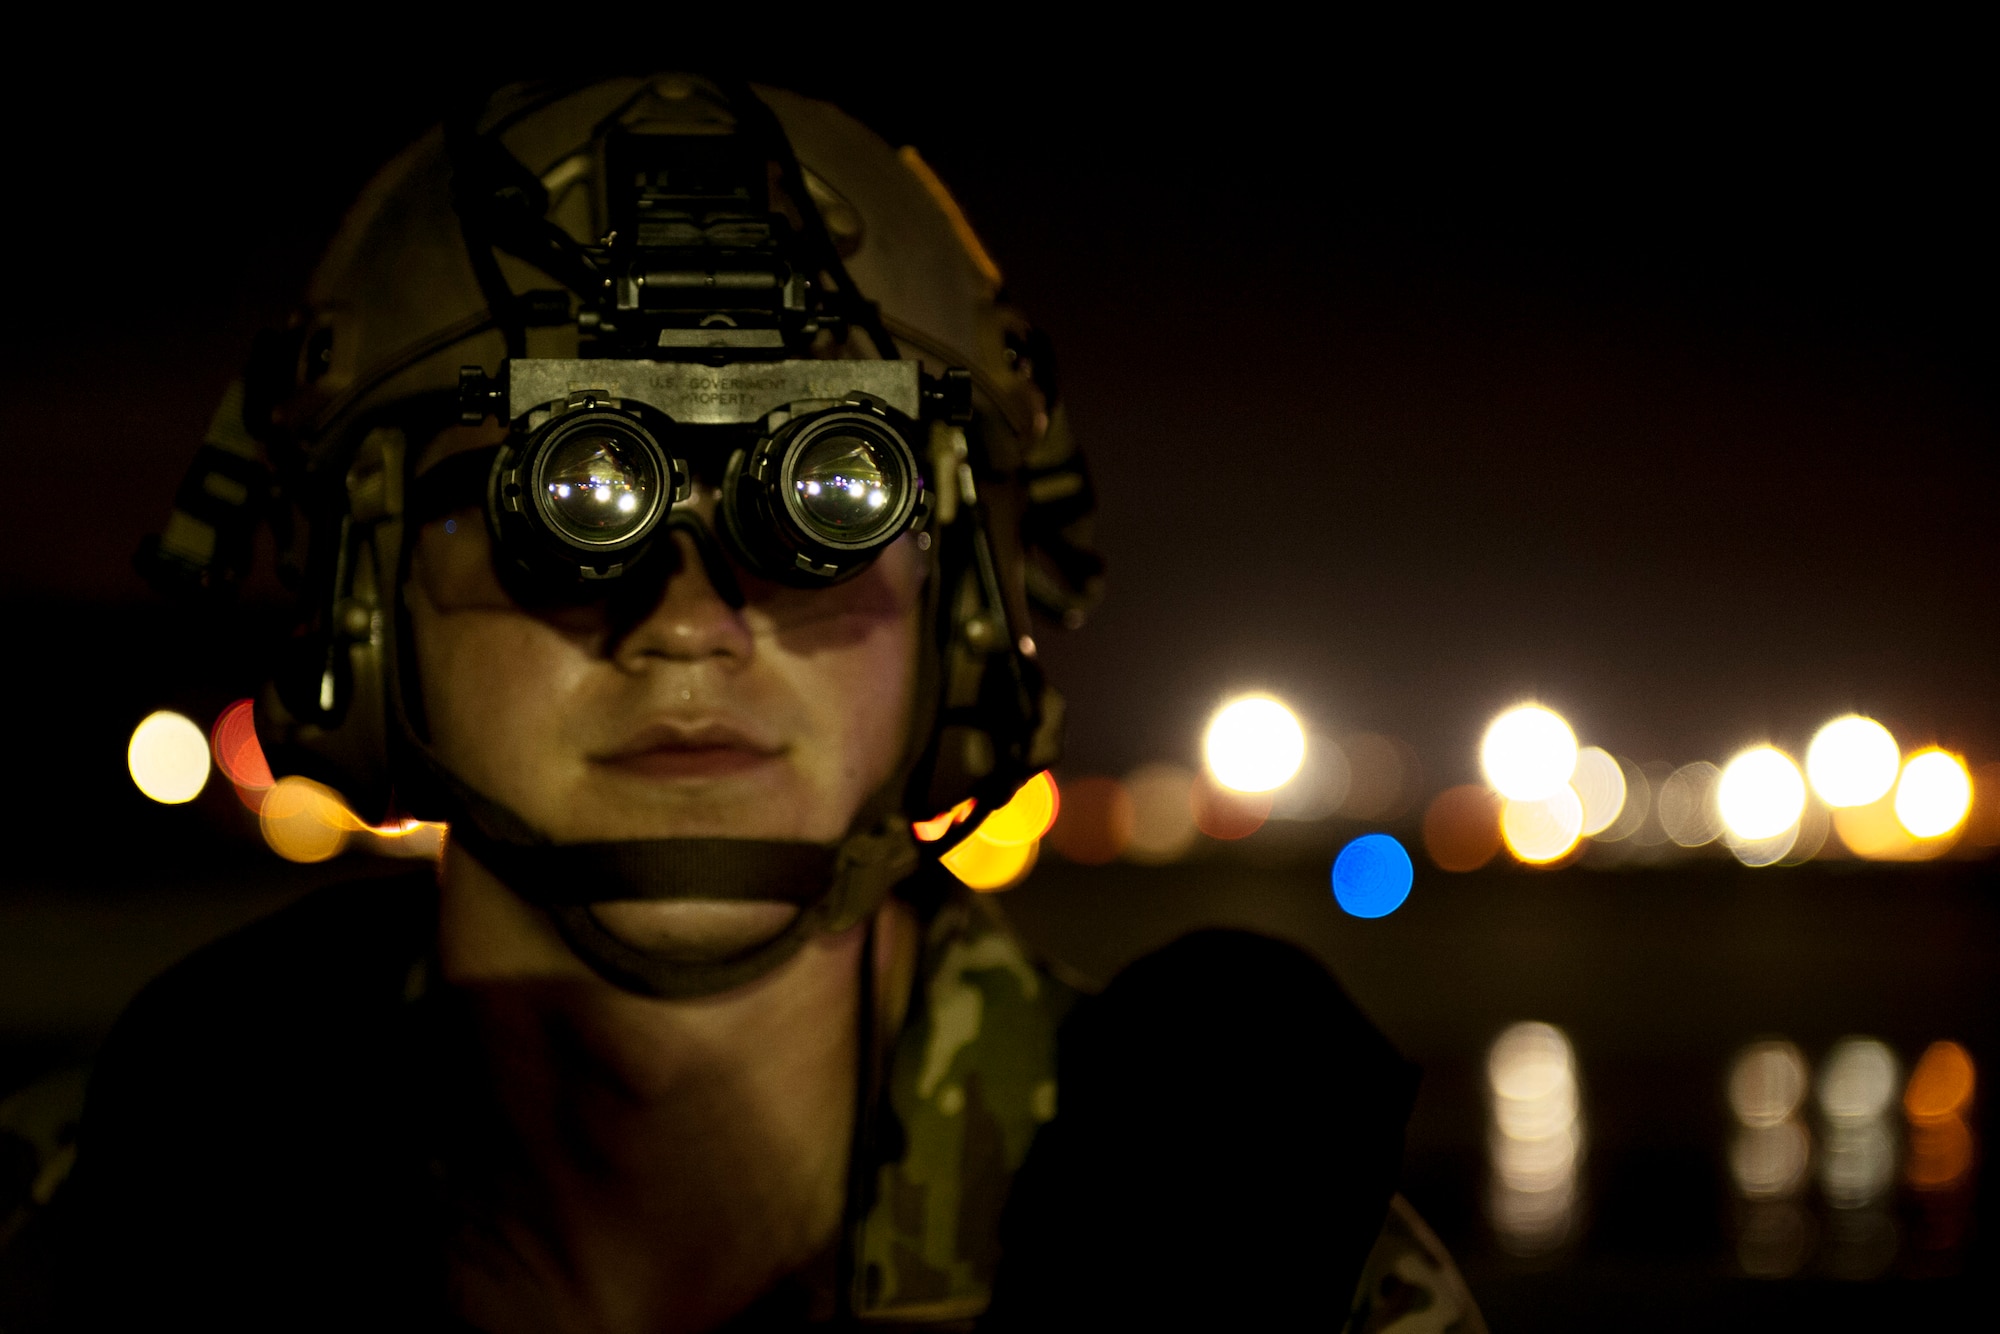 Senior Airman Brandon Craver, 18th Logistics Readiness Squadron fuels distribution operator, observes the flight line during a nighttime refueling exercise July 27, 2016, at Kadena Air Base, Japan. The 18th LRS and 1st Special Operations Squadron conducted a refueling exercise to demonstrate forward-area refueling point capability in an austere environment. (U.S. Air Force photo by Senior Airman Peter Reft)